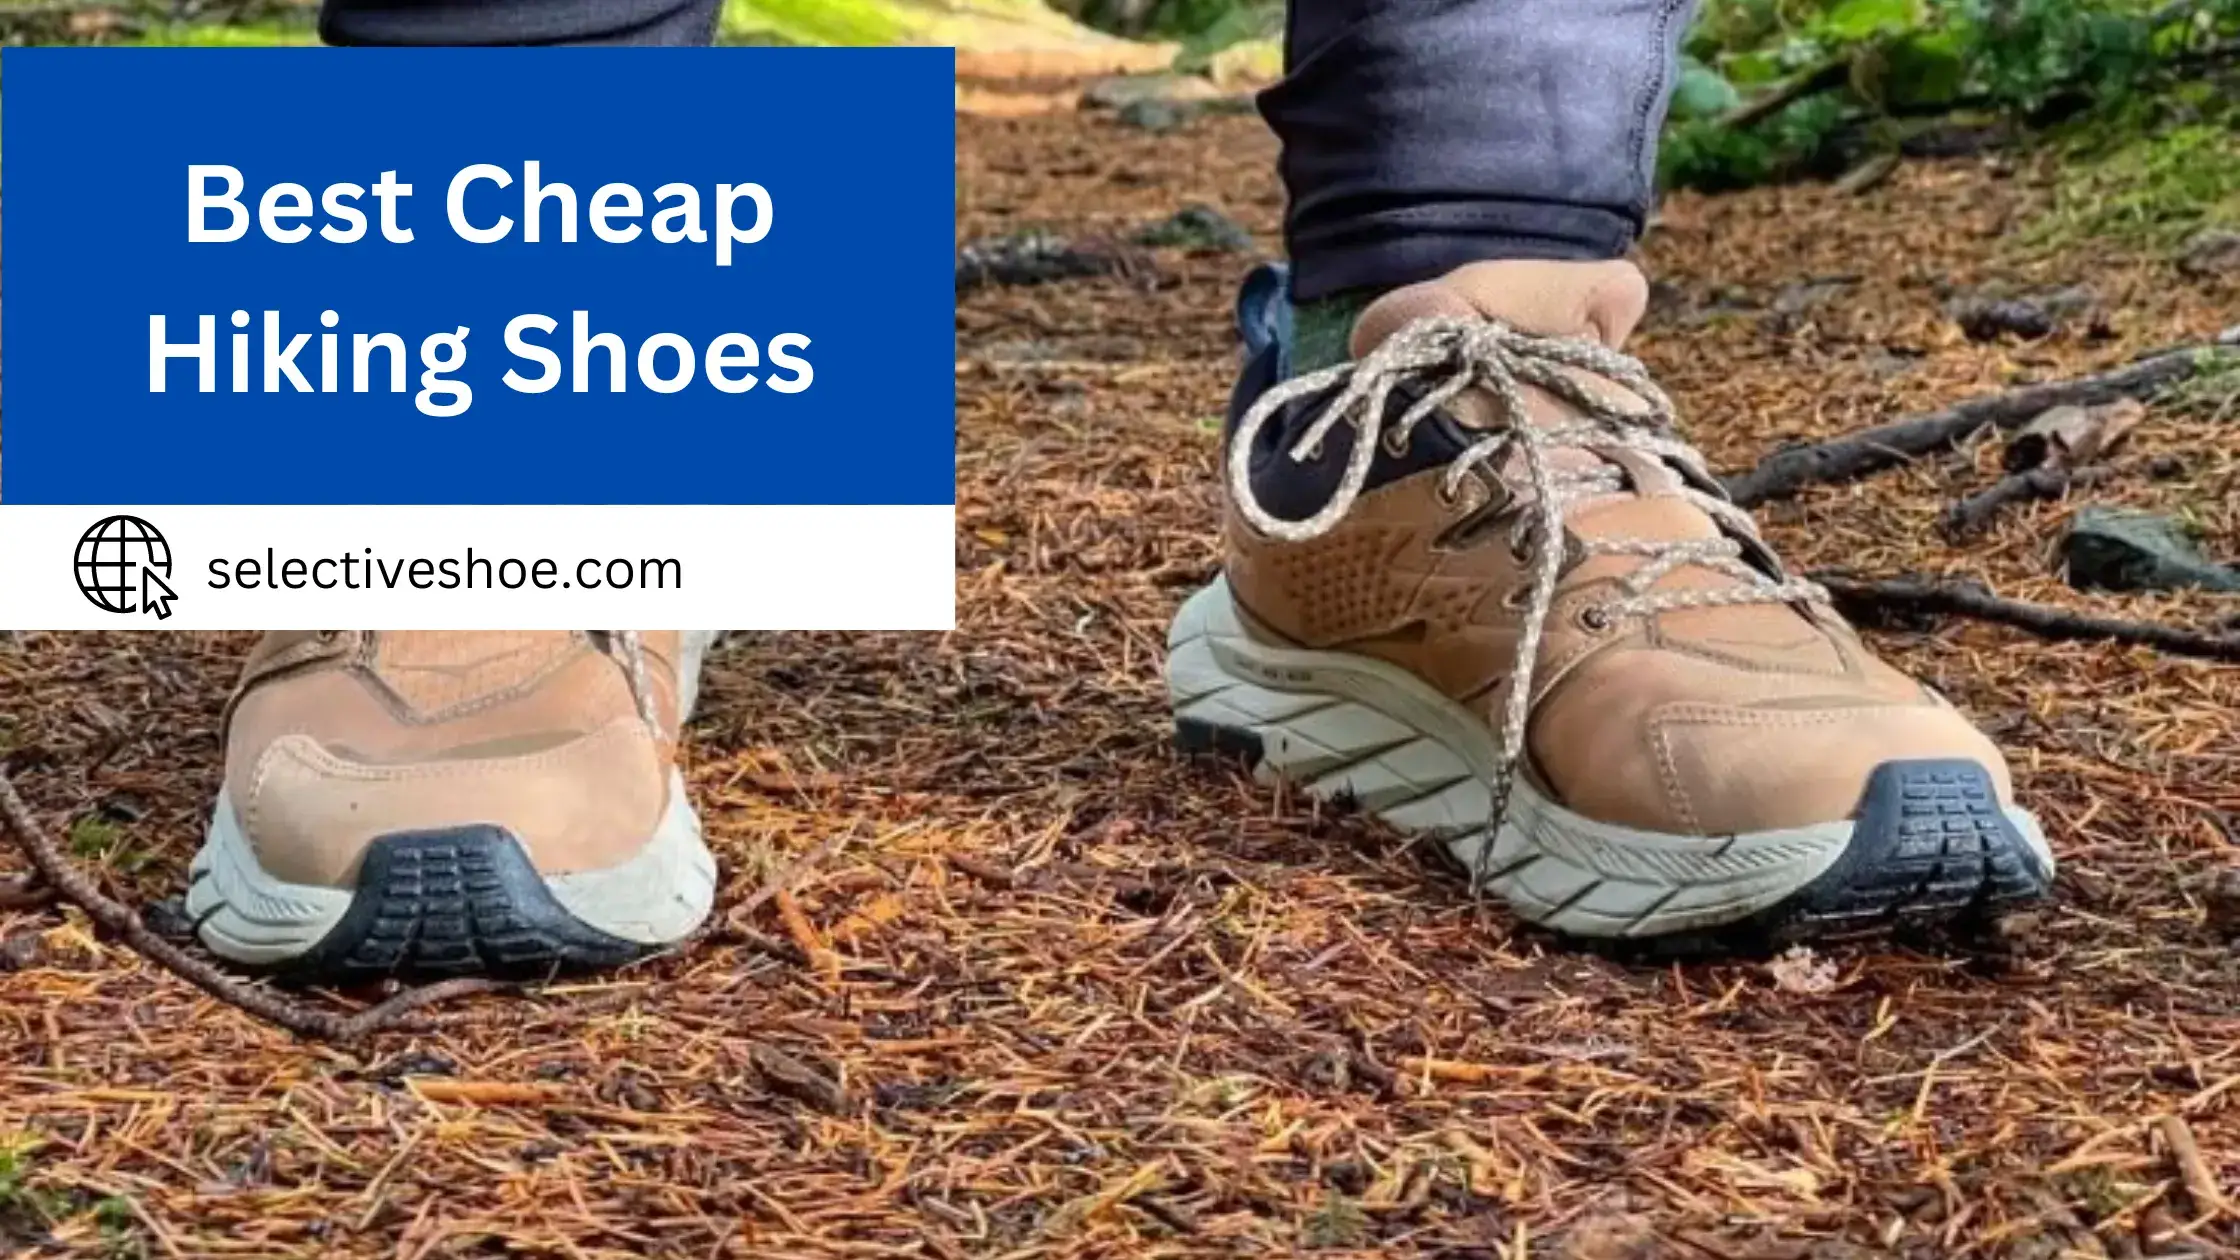 Best Cheap Hiking Shoes - A Comprehensive Guide